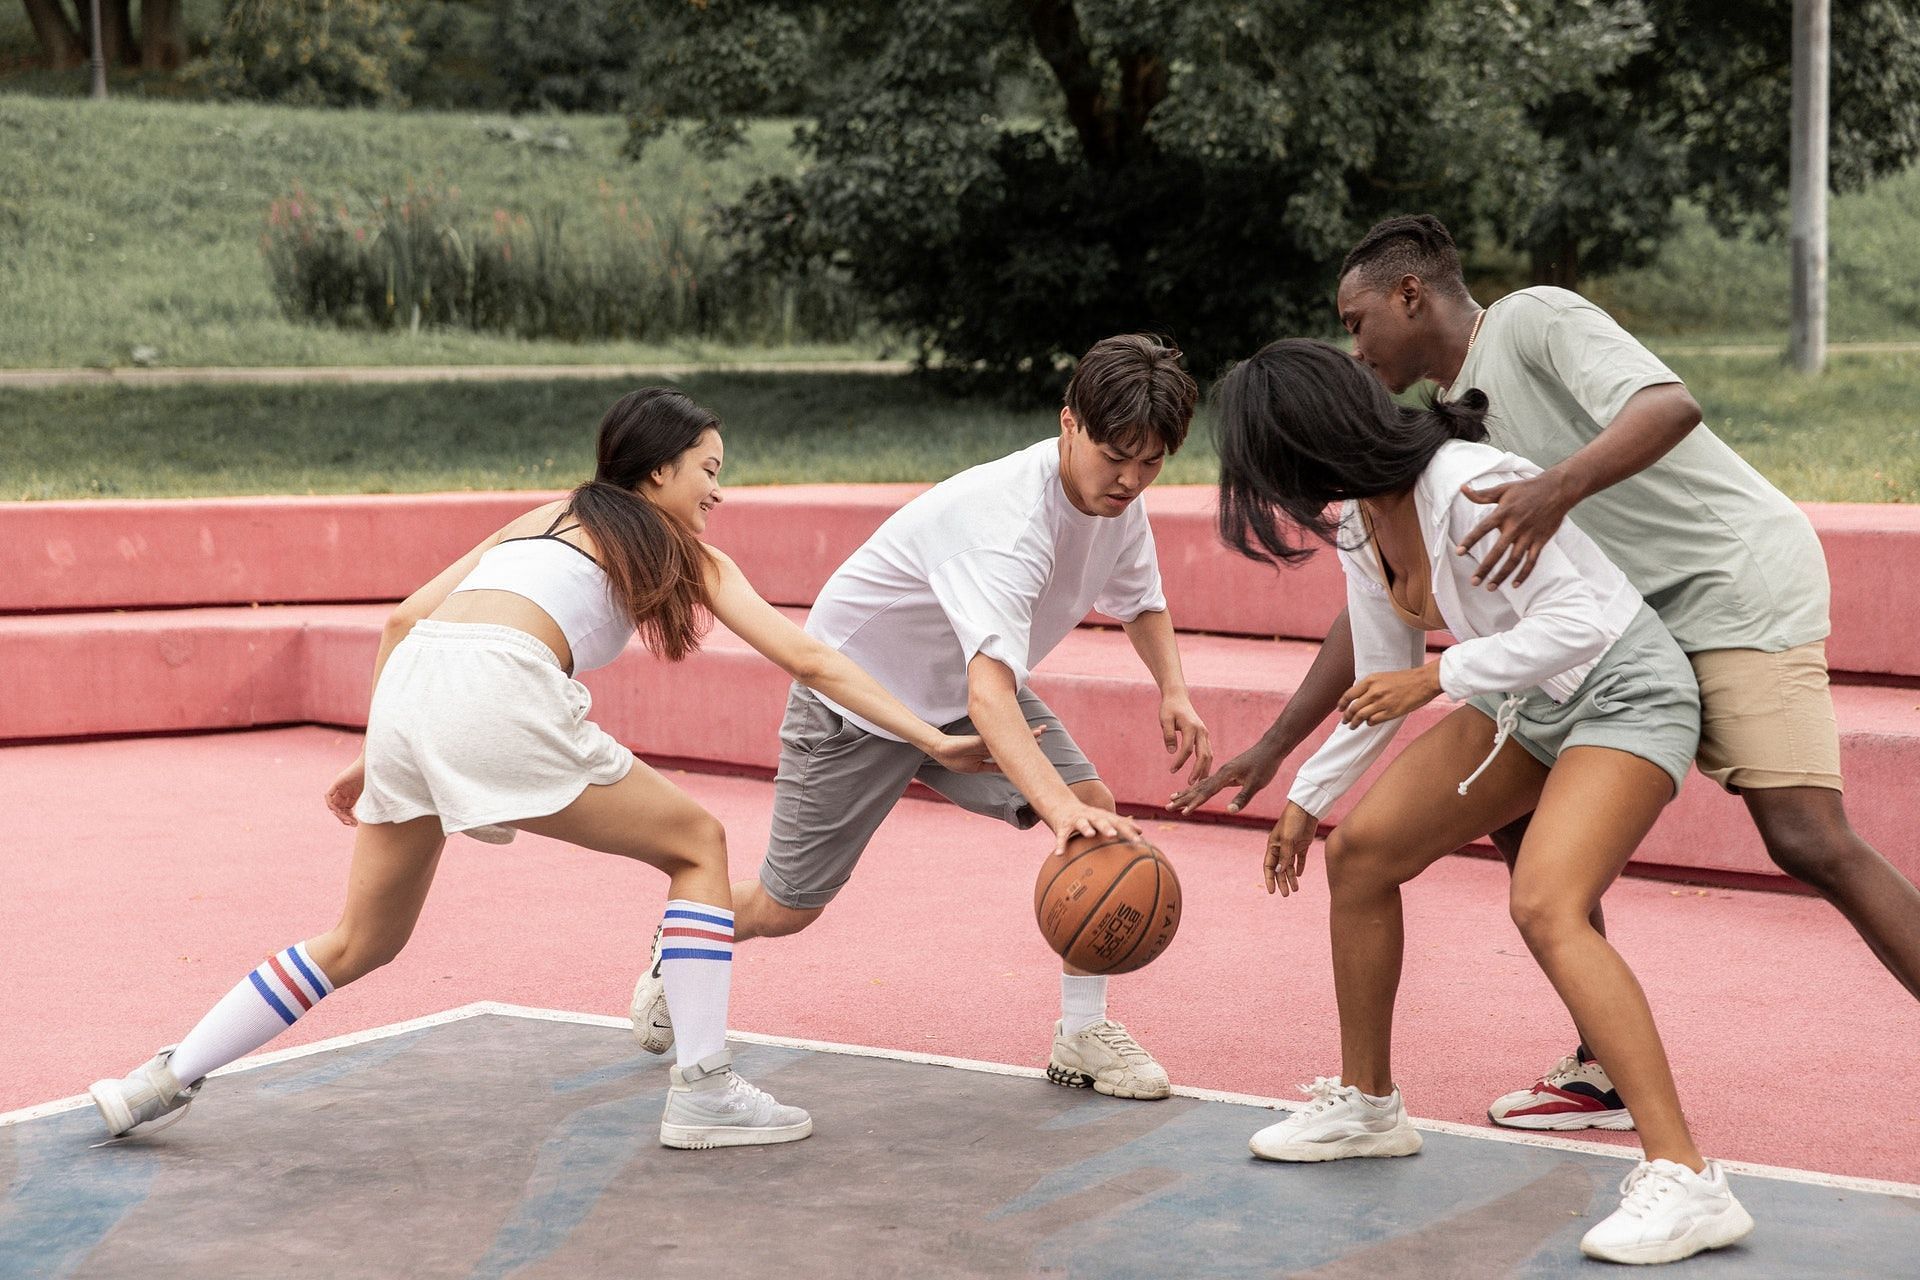 Safe exercises for teens. (Image via Pexels/Photo by Monstera)